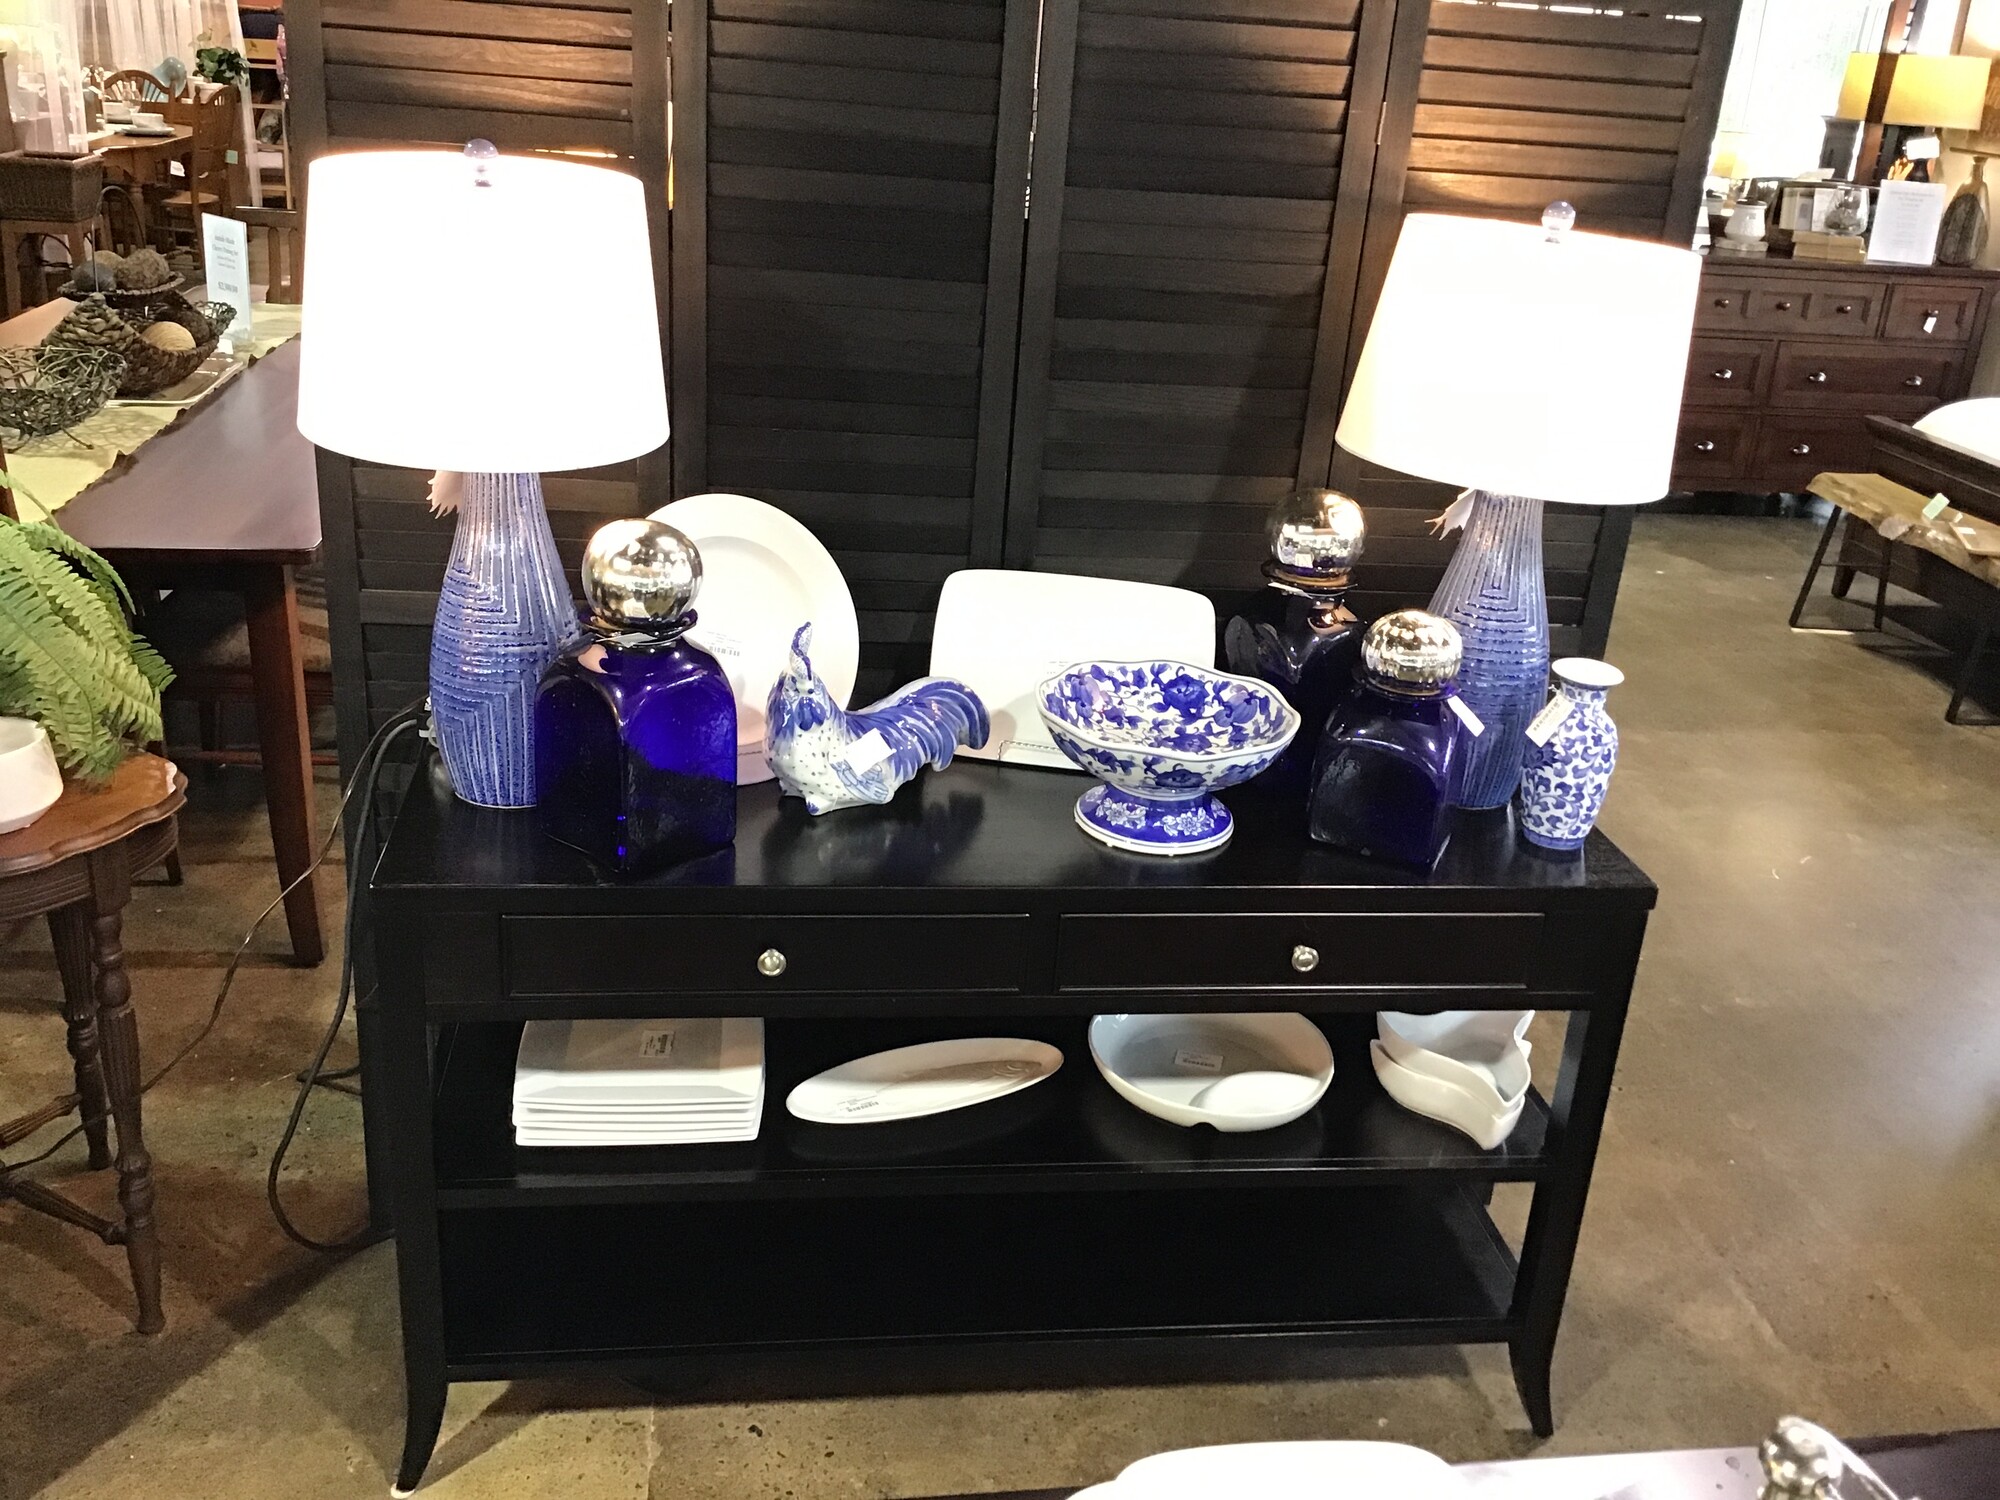 This is one of those pieces that can be used in so many different ways, that it is hard to pick what category to put it in.  Made by Arhaus.  Featuring two drawers accented with nickel knobs and two lower shelves, all finished in black.  This could be a media stand, a buffet, an entryway table or a sofa table!

Dimensions:  54x18x30